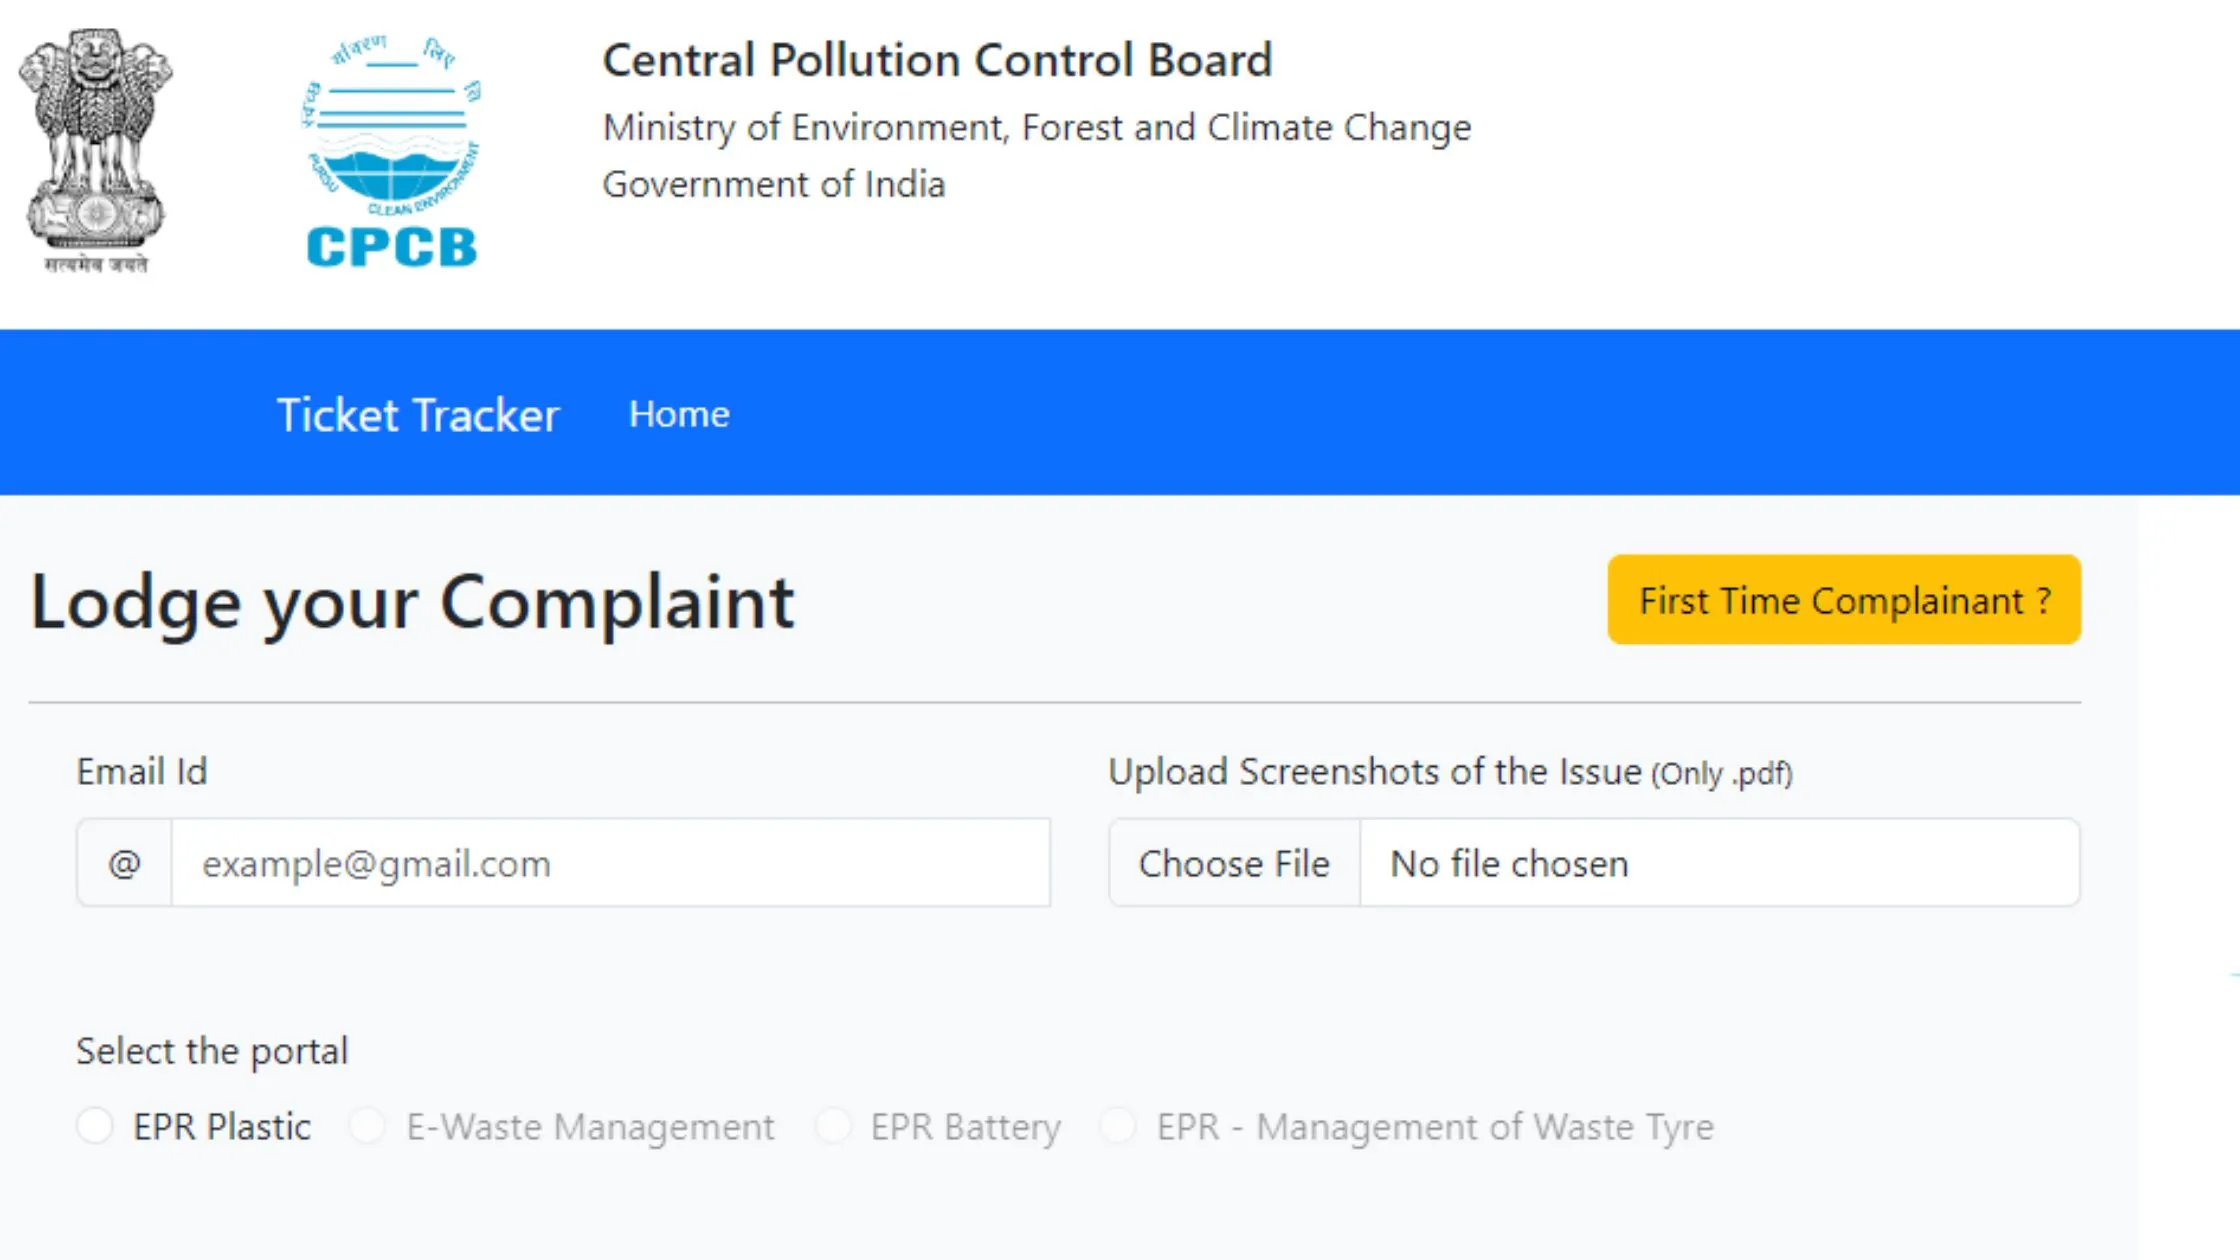 How to lodge a complaint on Central Pollution Control Board (CPCB) Portal